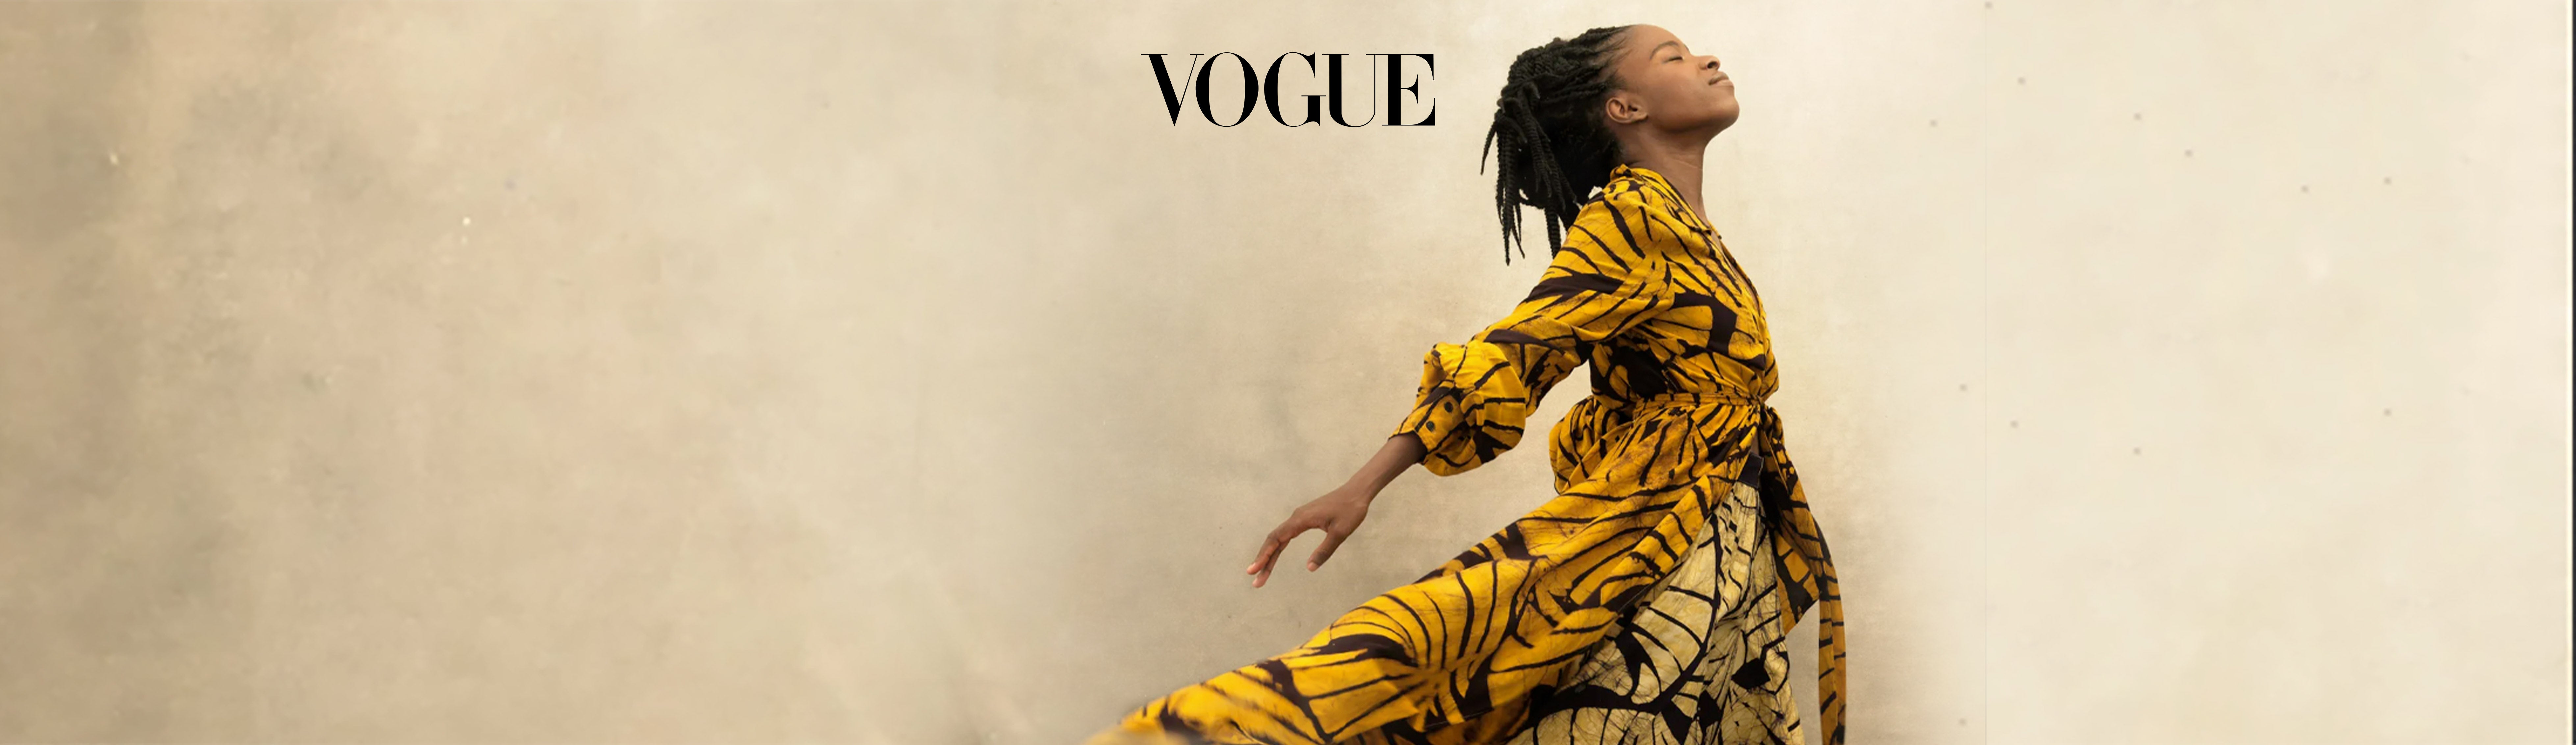 Amanda Gorman Is on the Cover of Vogue